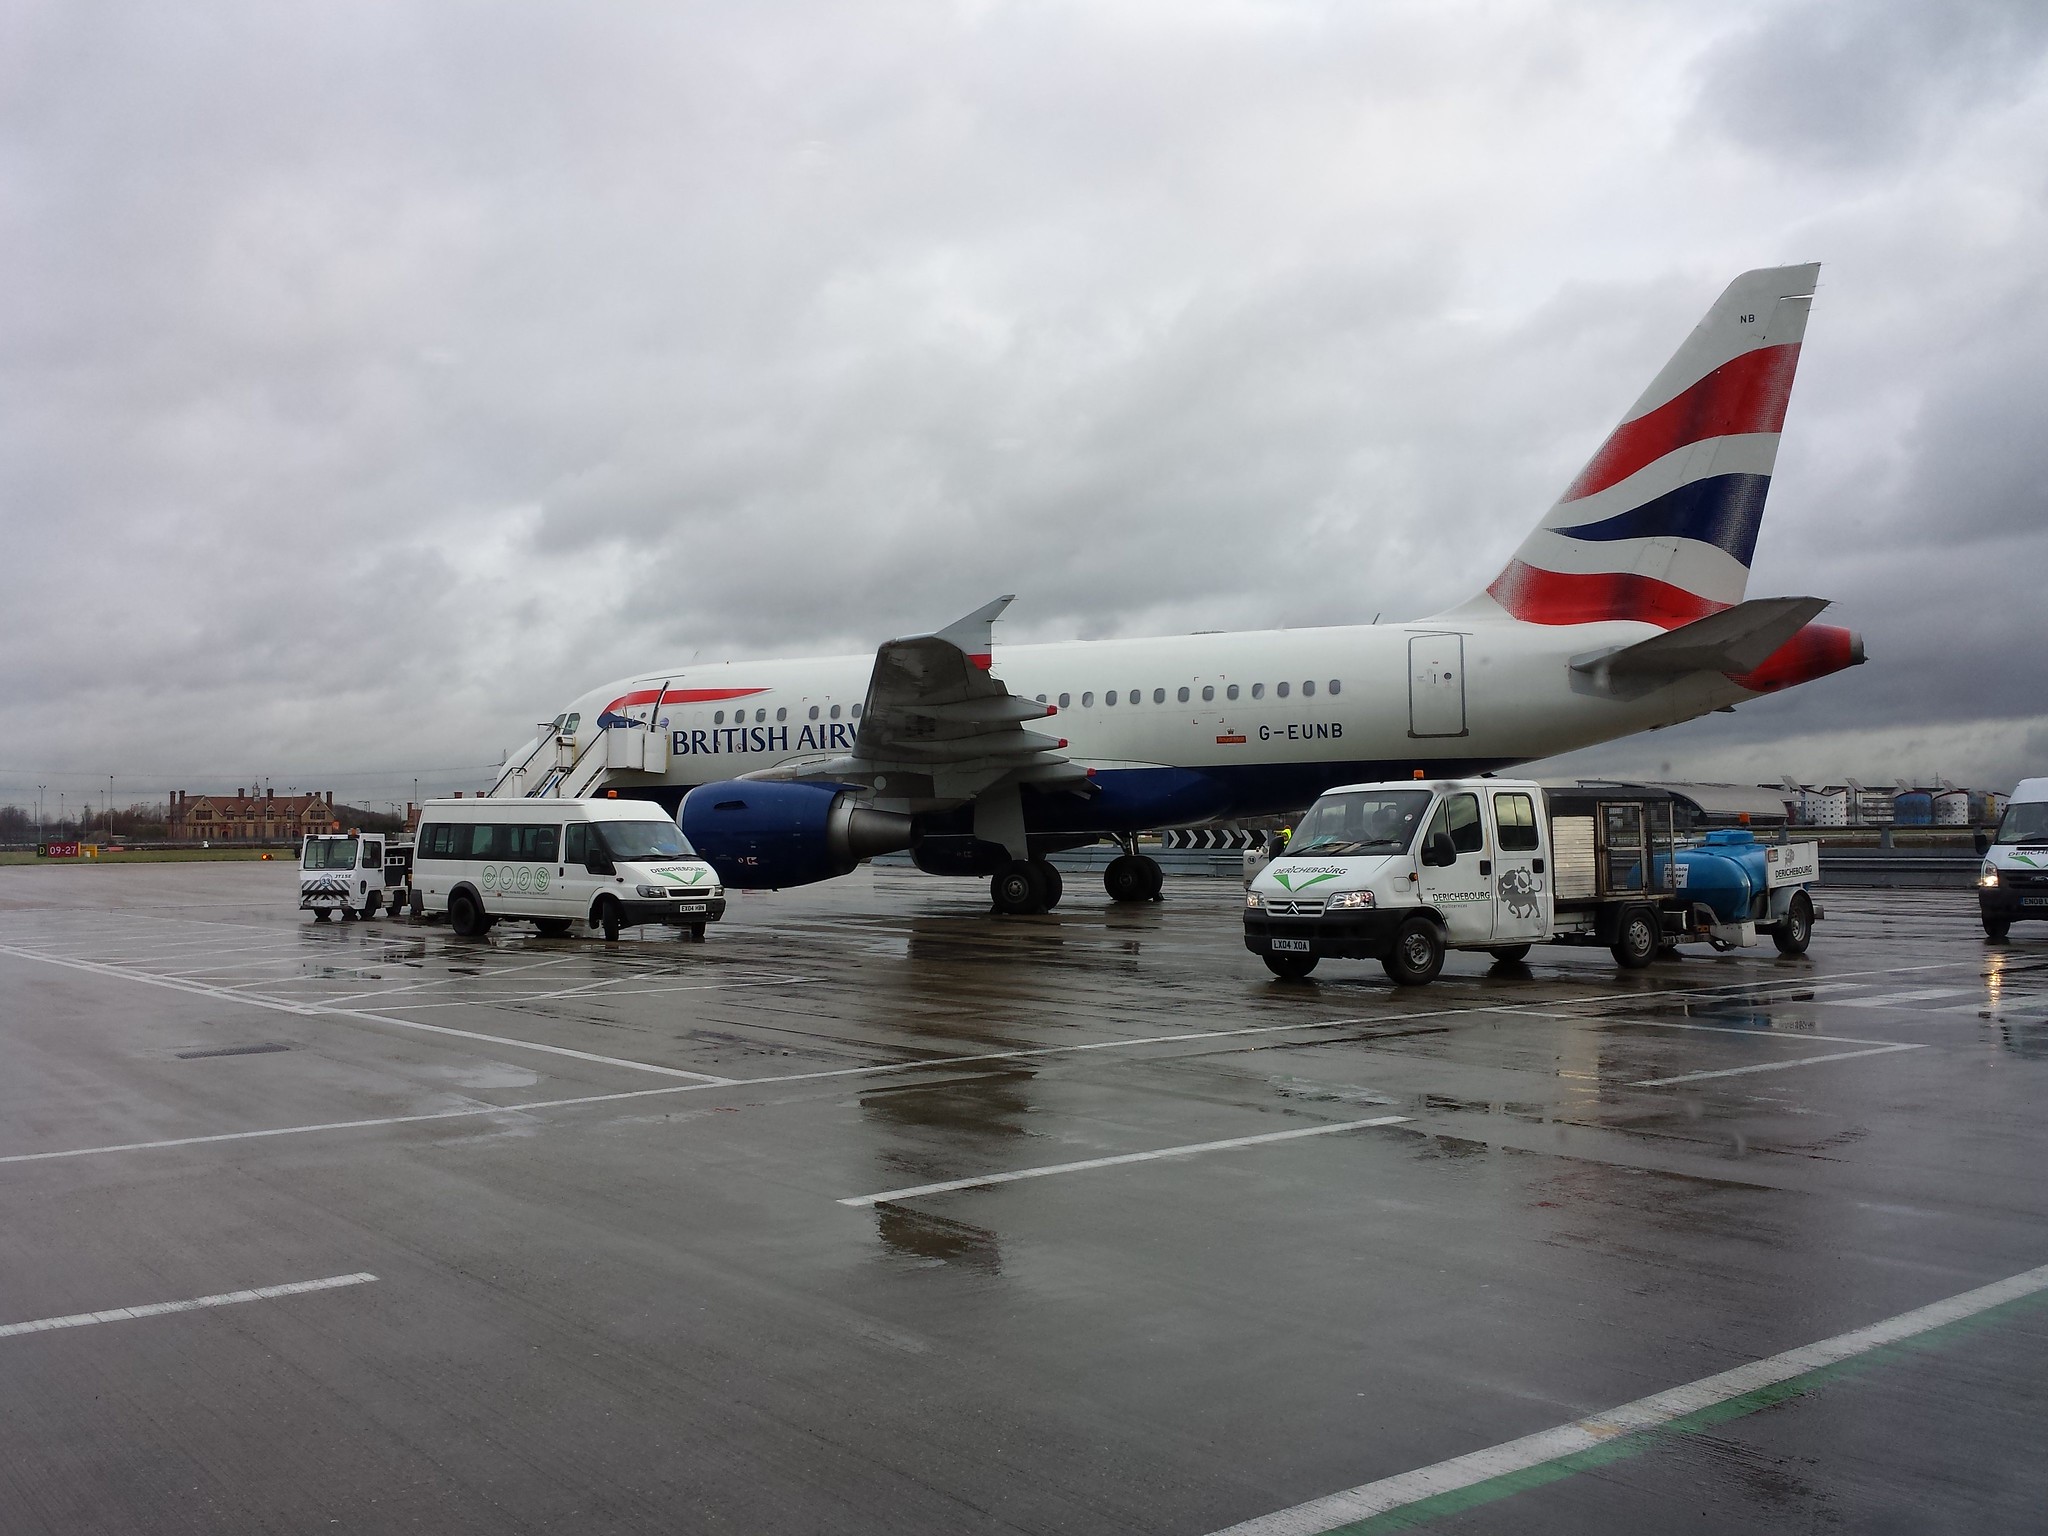 The BA A318 that would take me to New York JFK